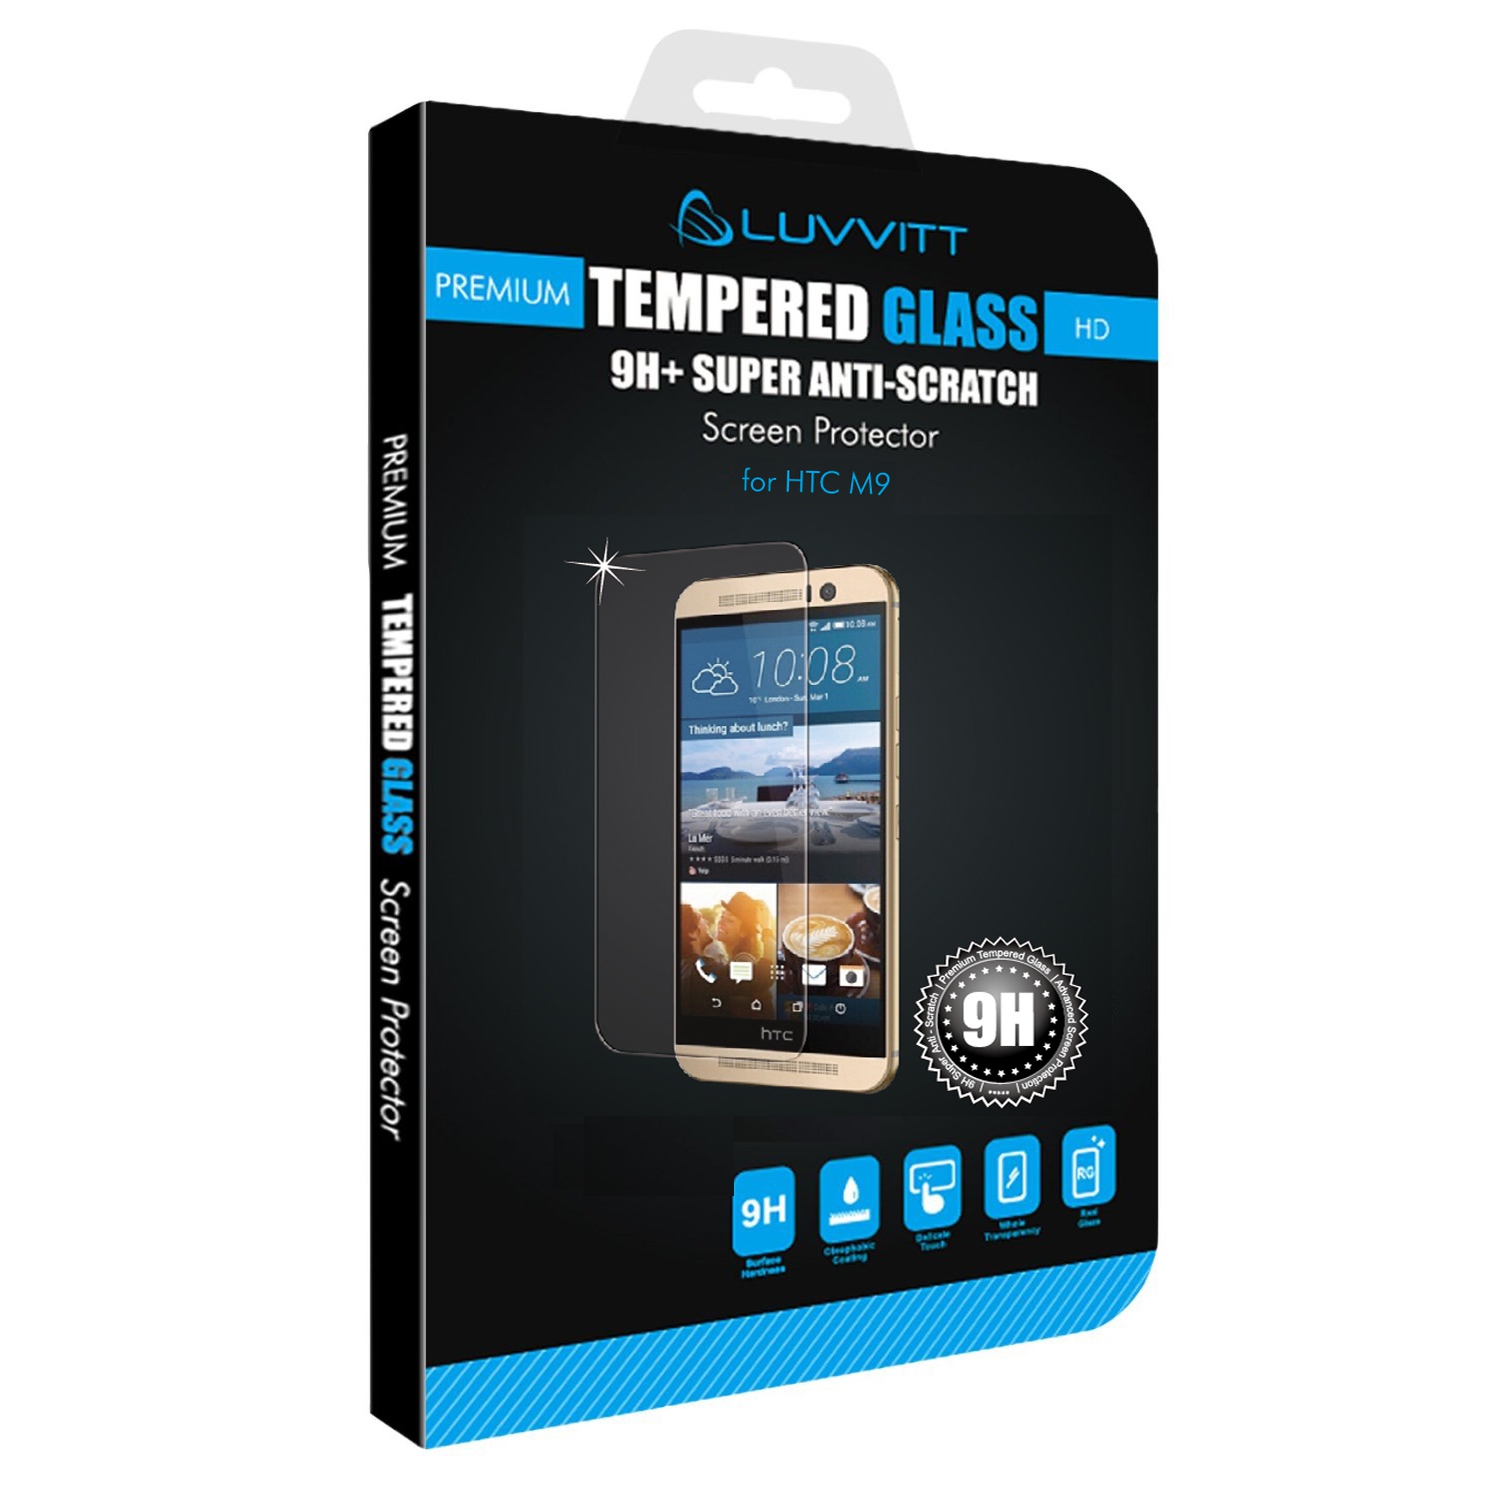 LUVVITT TEMPERED GLASS Screen Protector for HTC One M9 - Crystal Clear